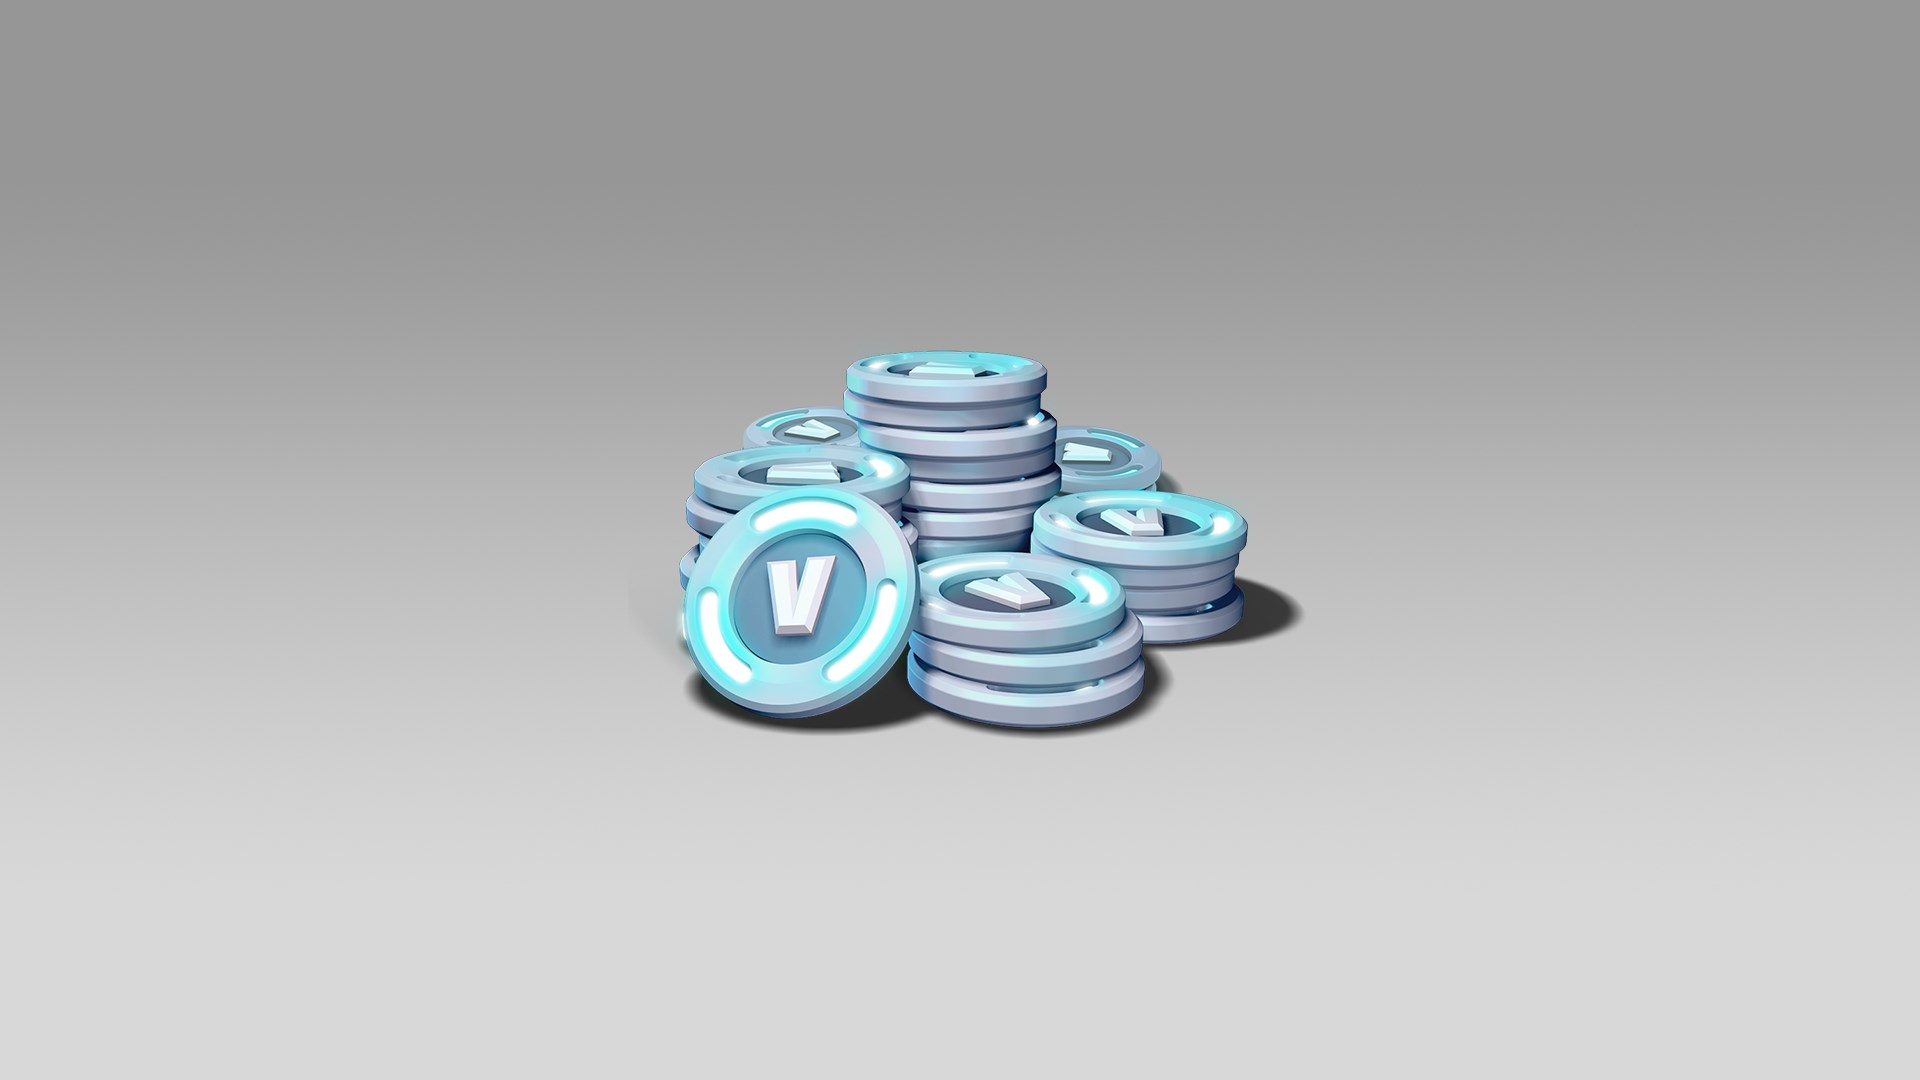 Fortnite V-Bucks: What Are They And Where Can You Use Them? | vlr.eng.br